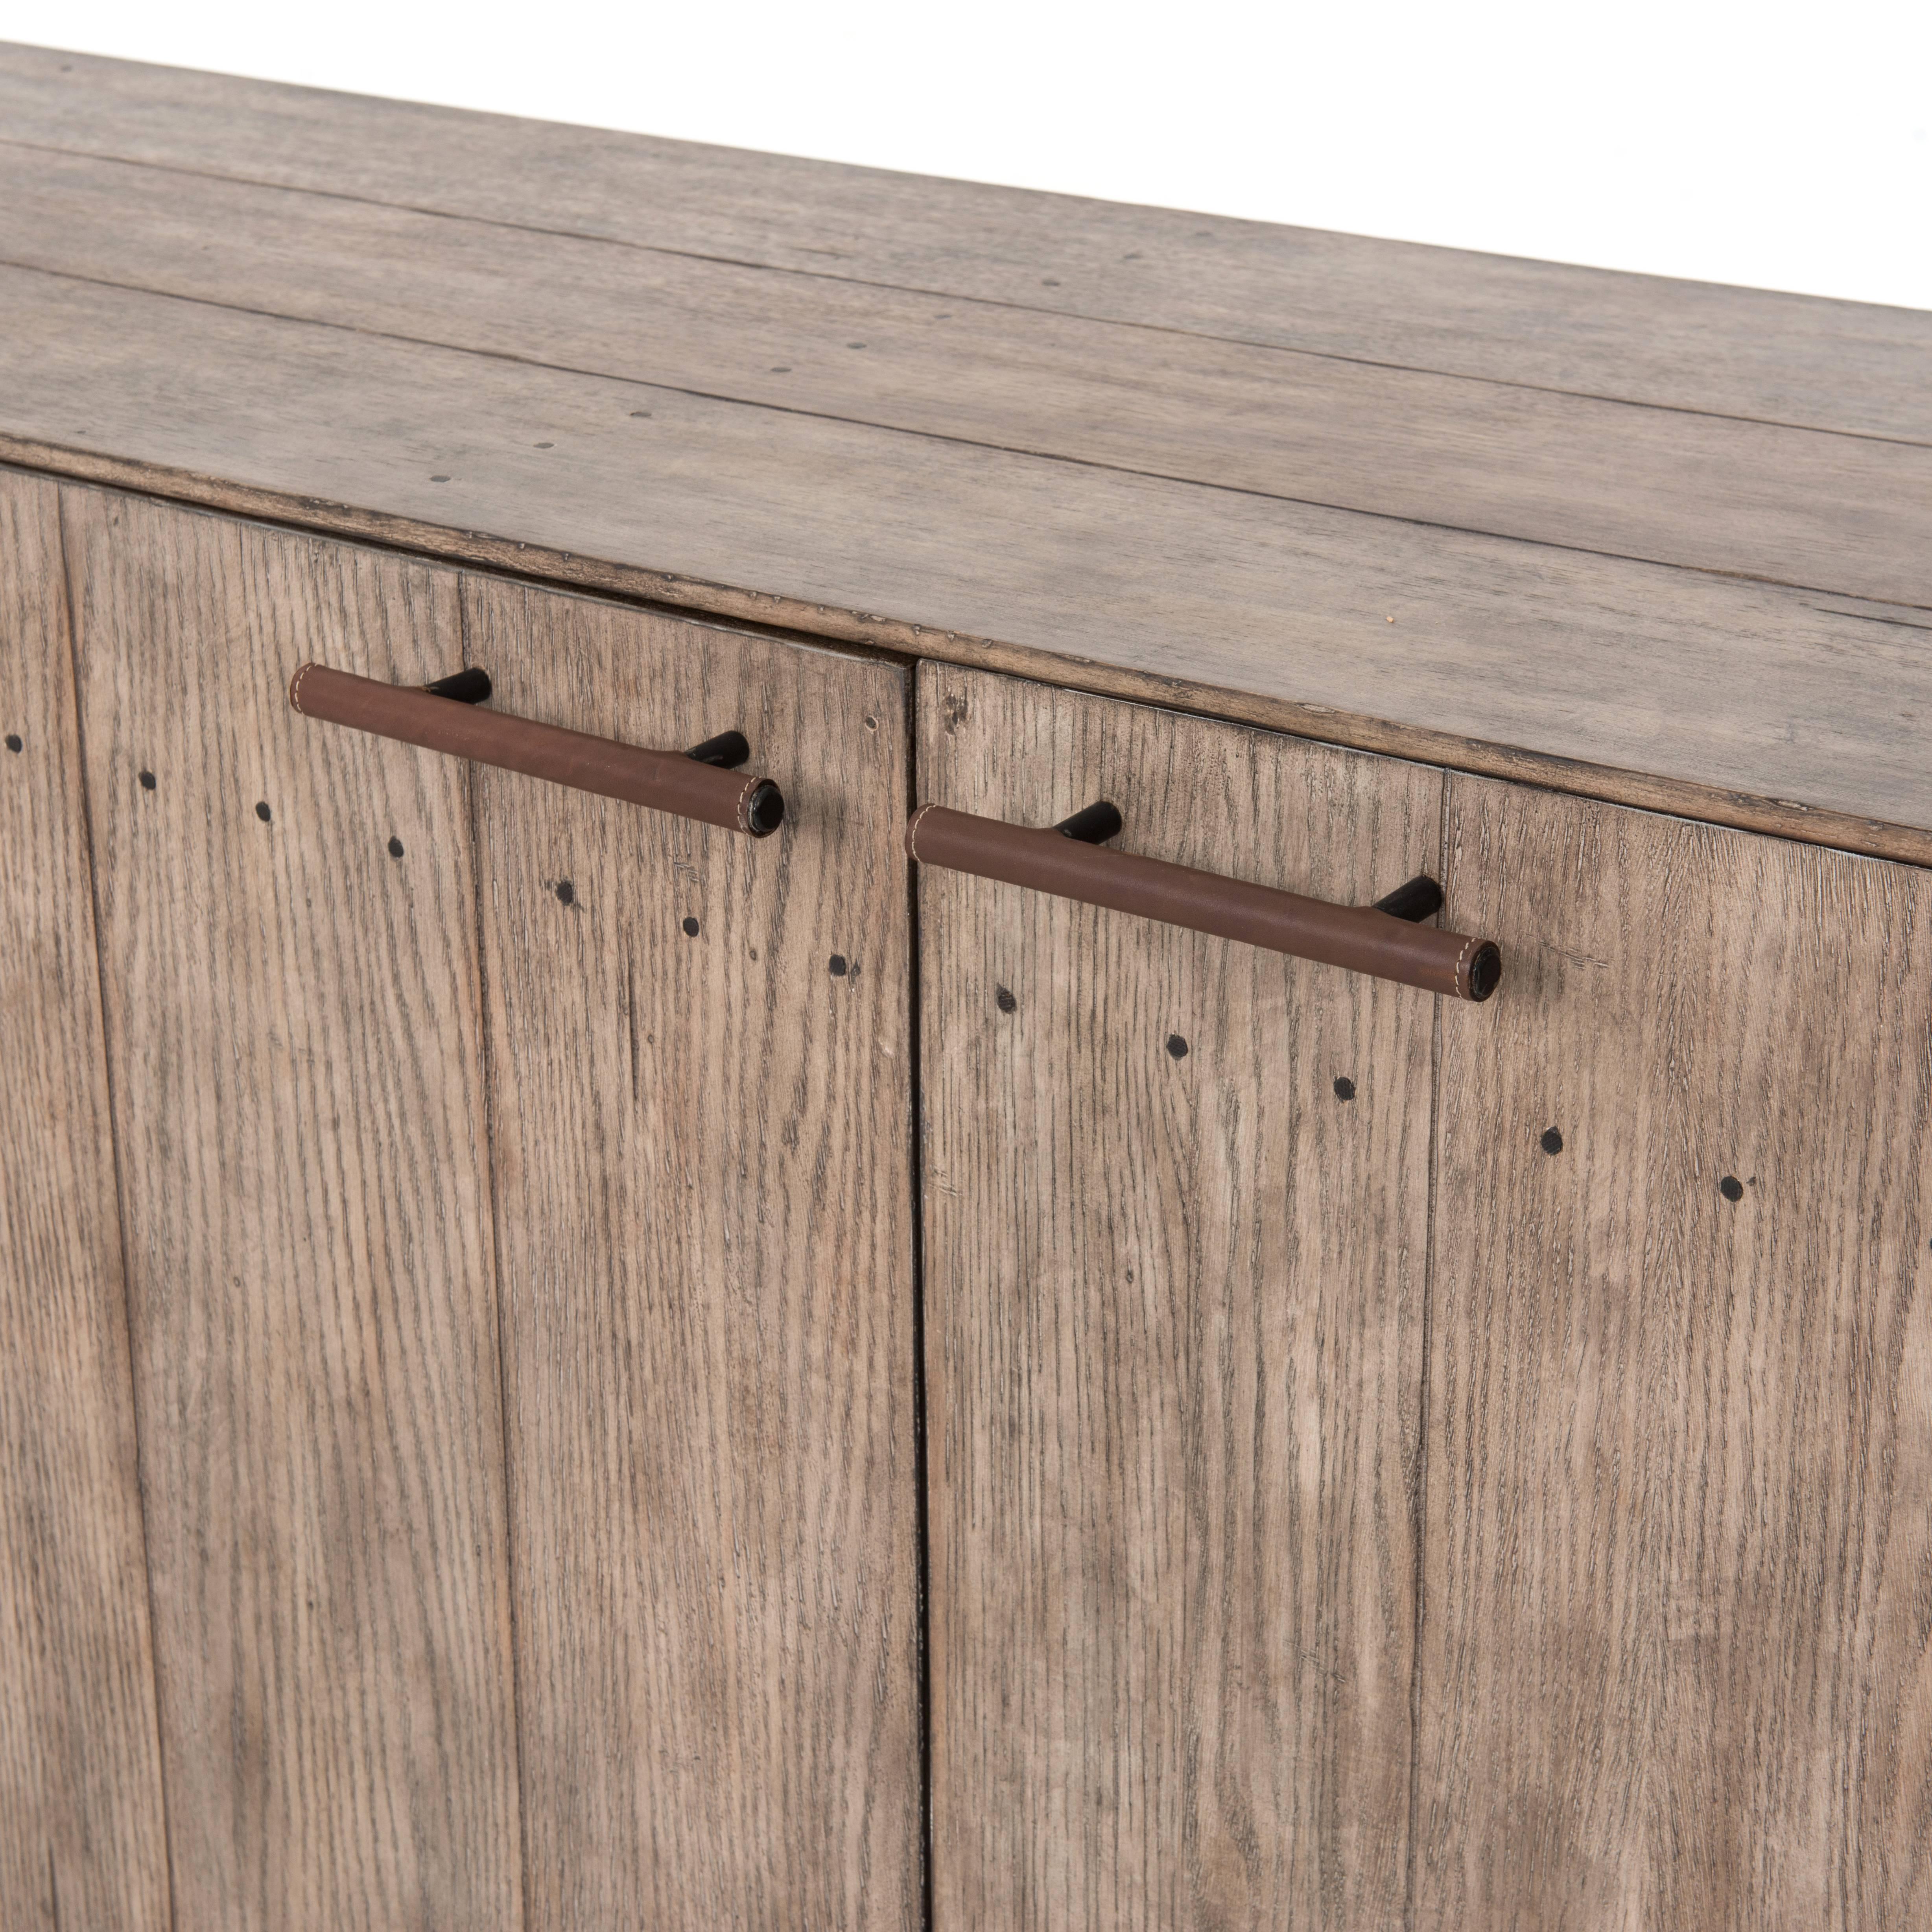 Distressed oak is washed and softened to a driftwood grey, and accented by leather-wrapped iron hardware. Long narrow sideboard.